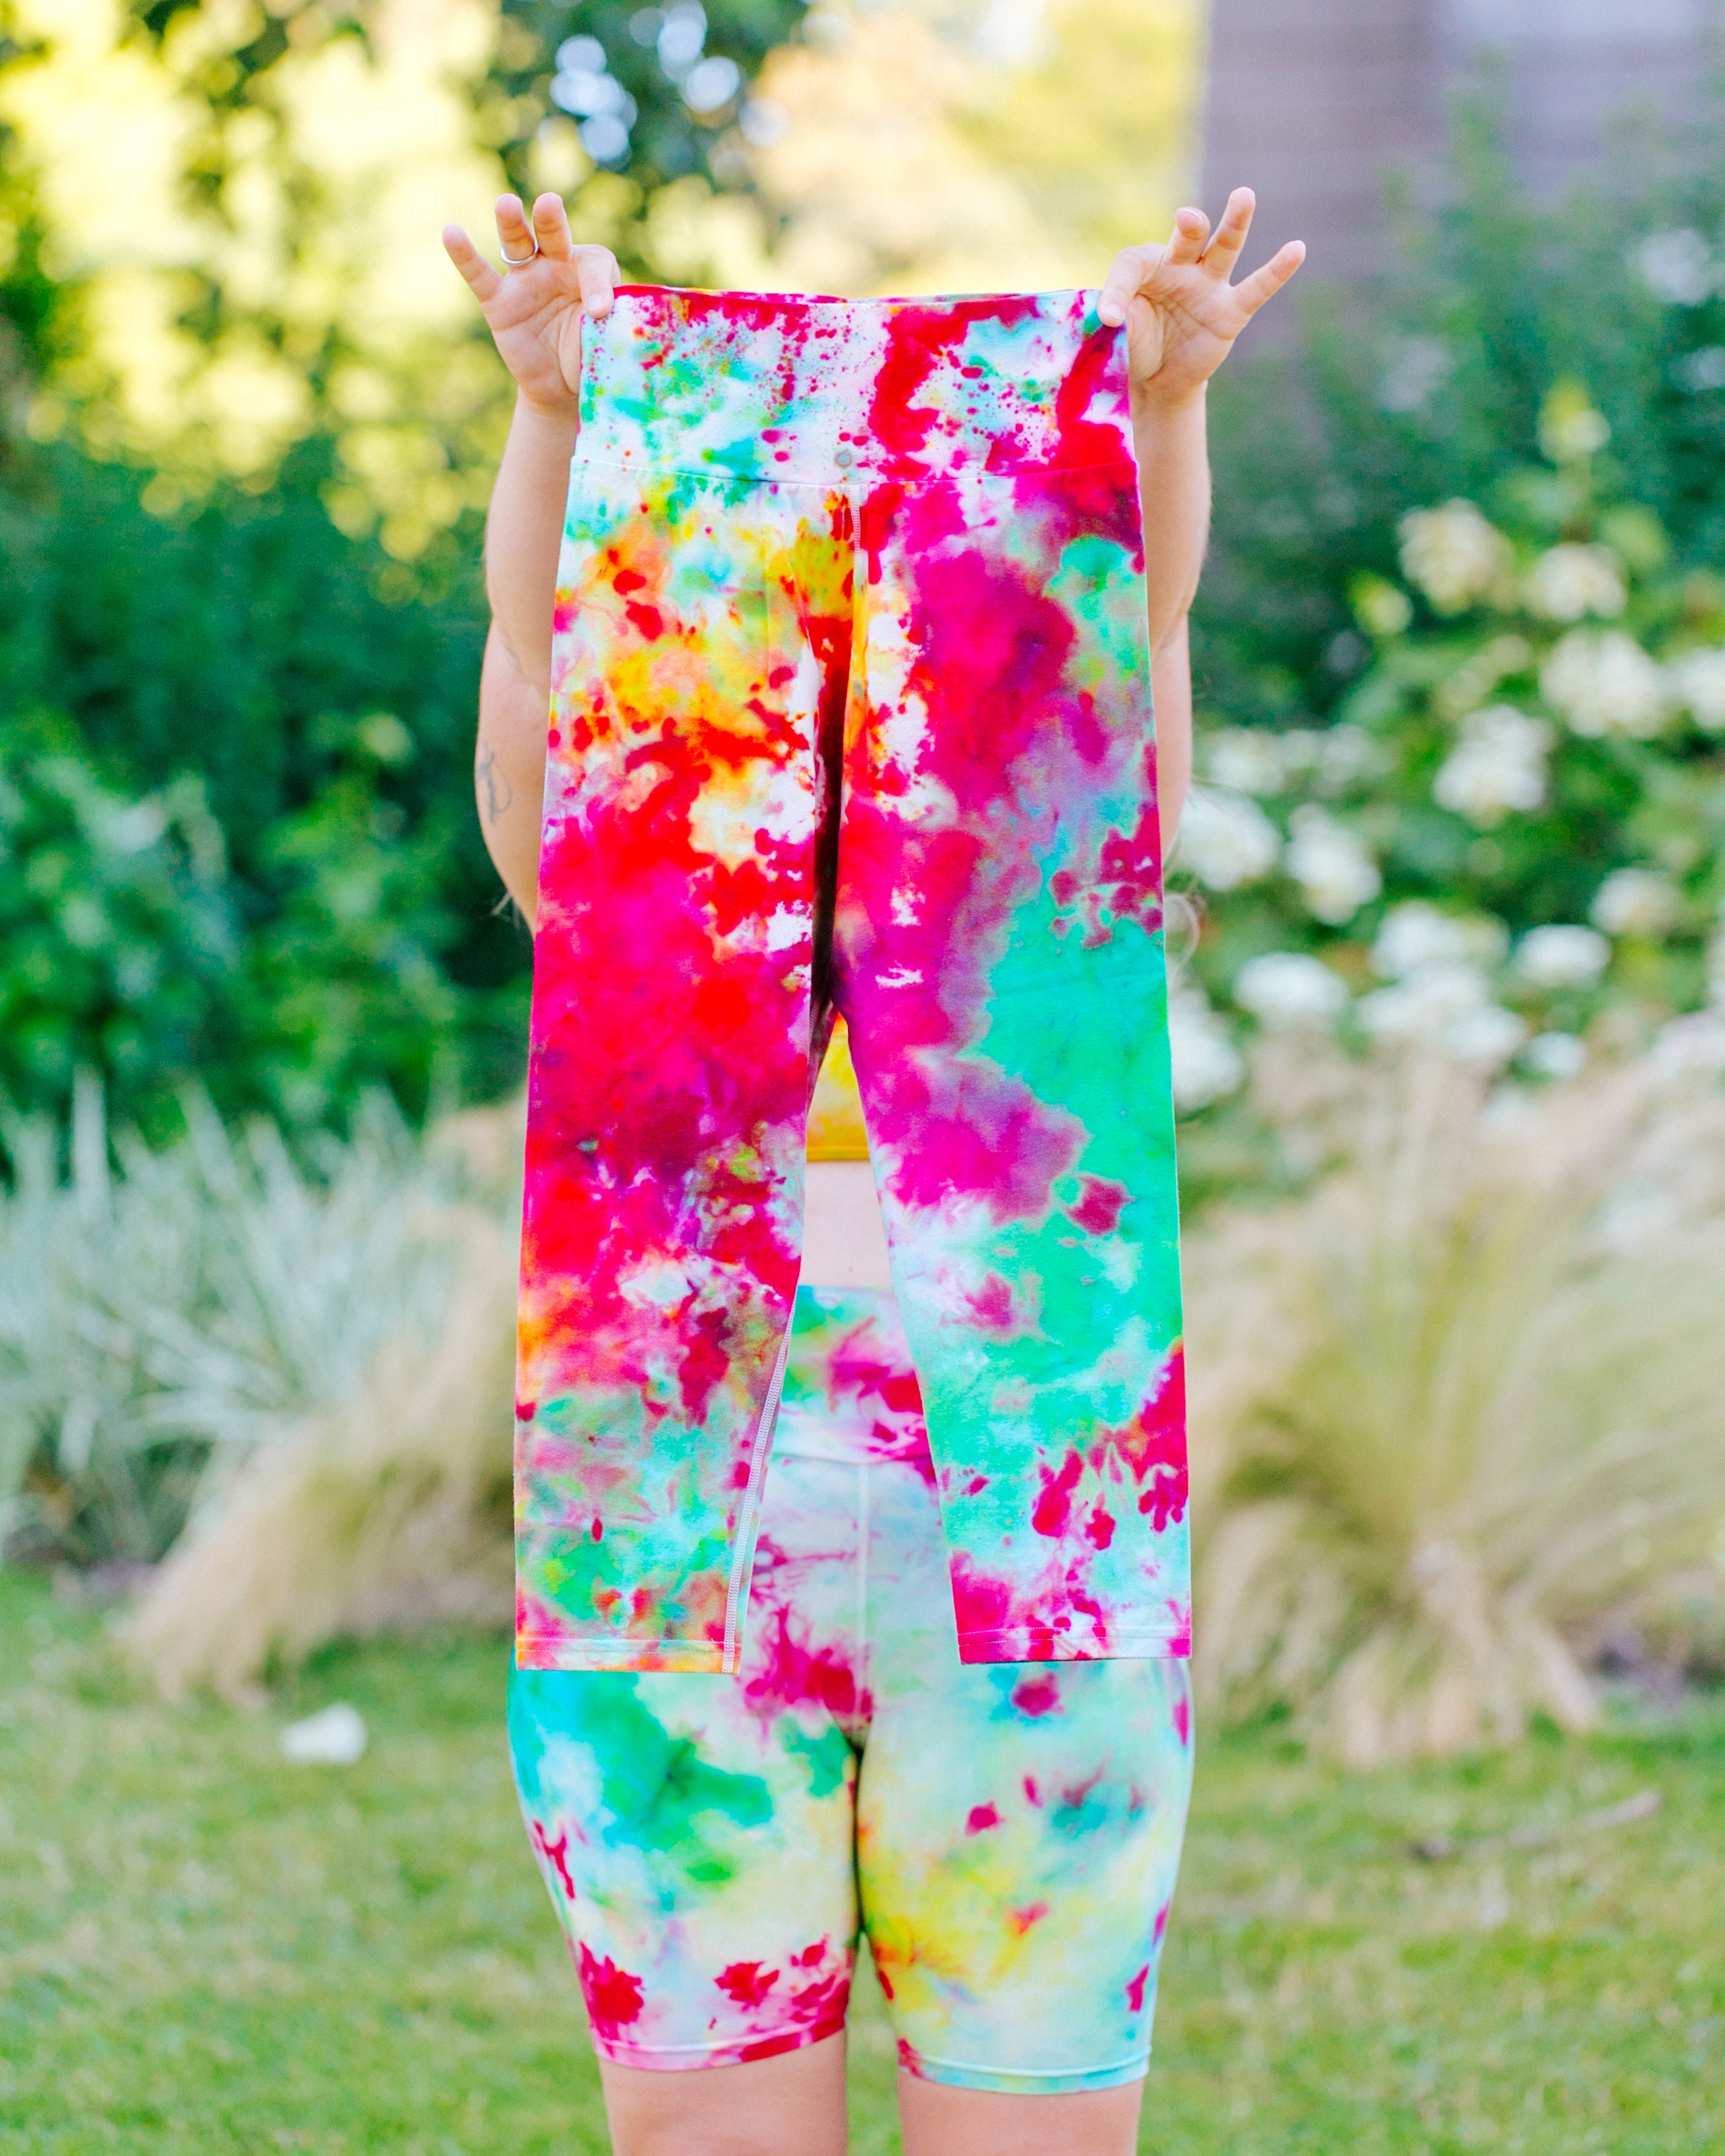 Model wearing Ice Dyed Bike Shorts holding up Ice Dyed 3/4 Length Leggings in a mix of pink, yellow, and green colors.